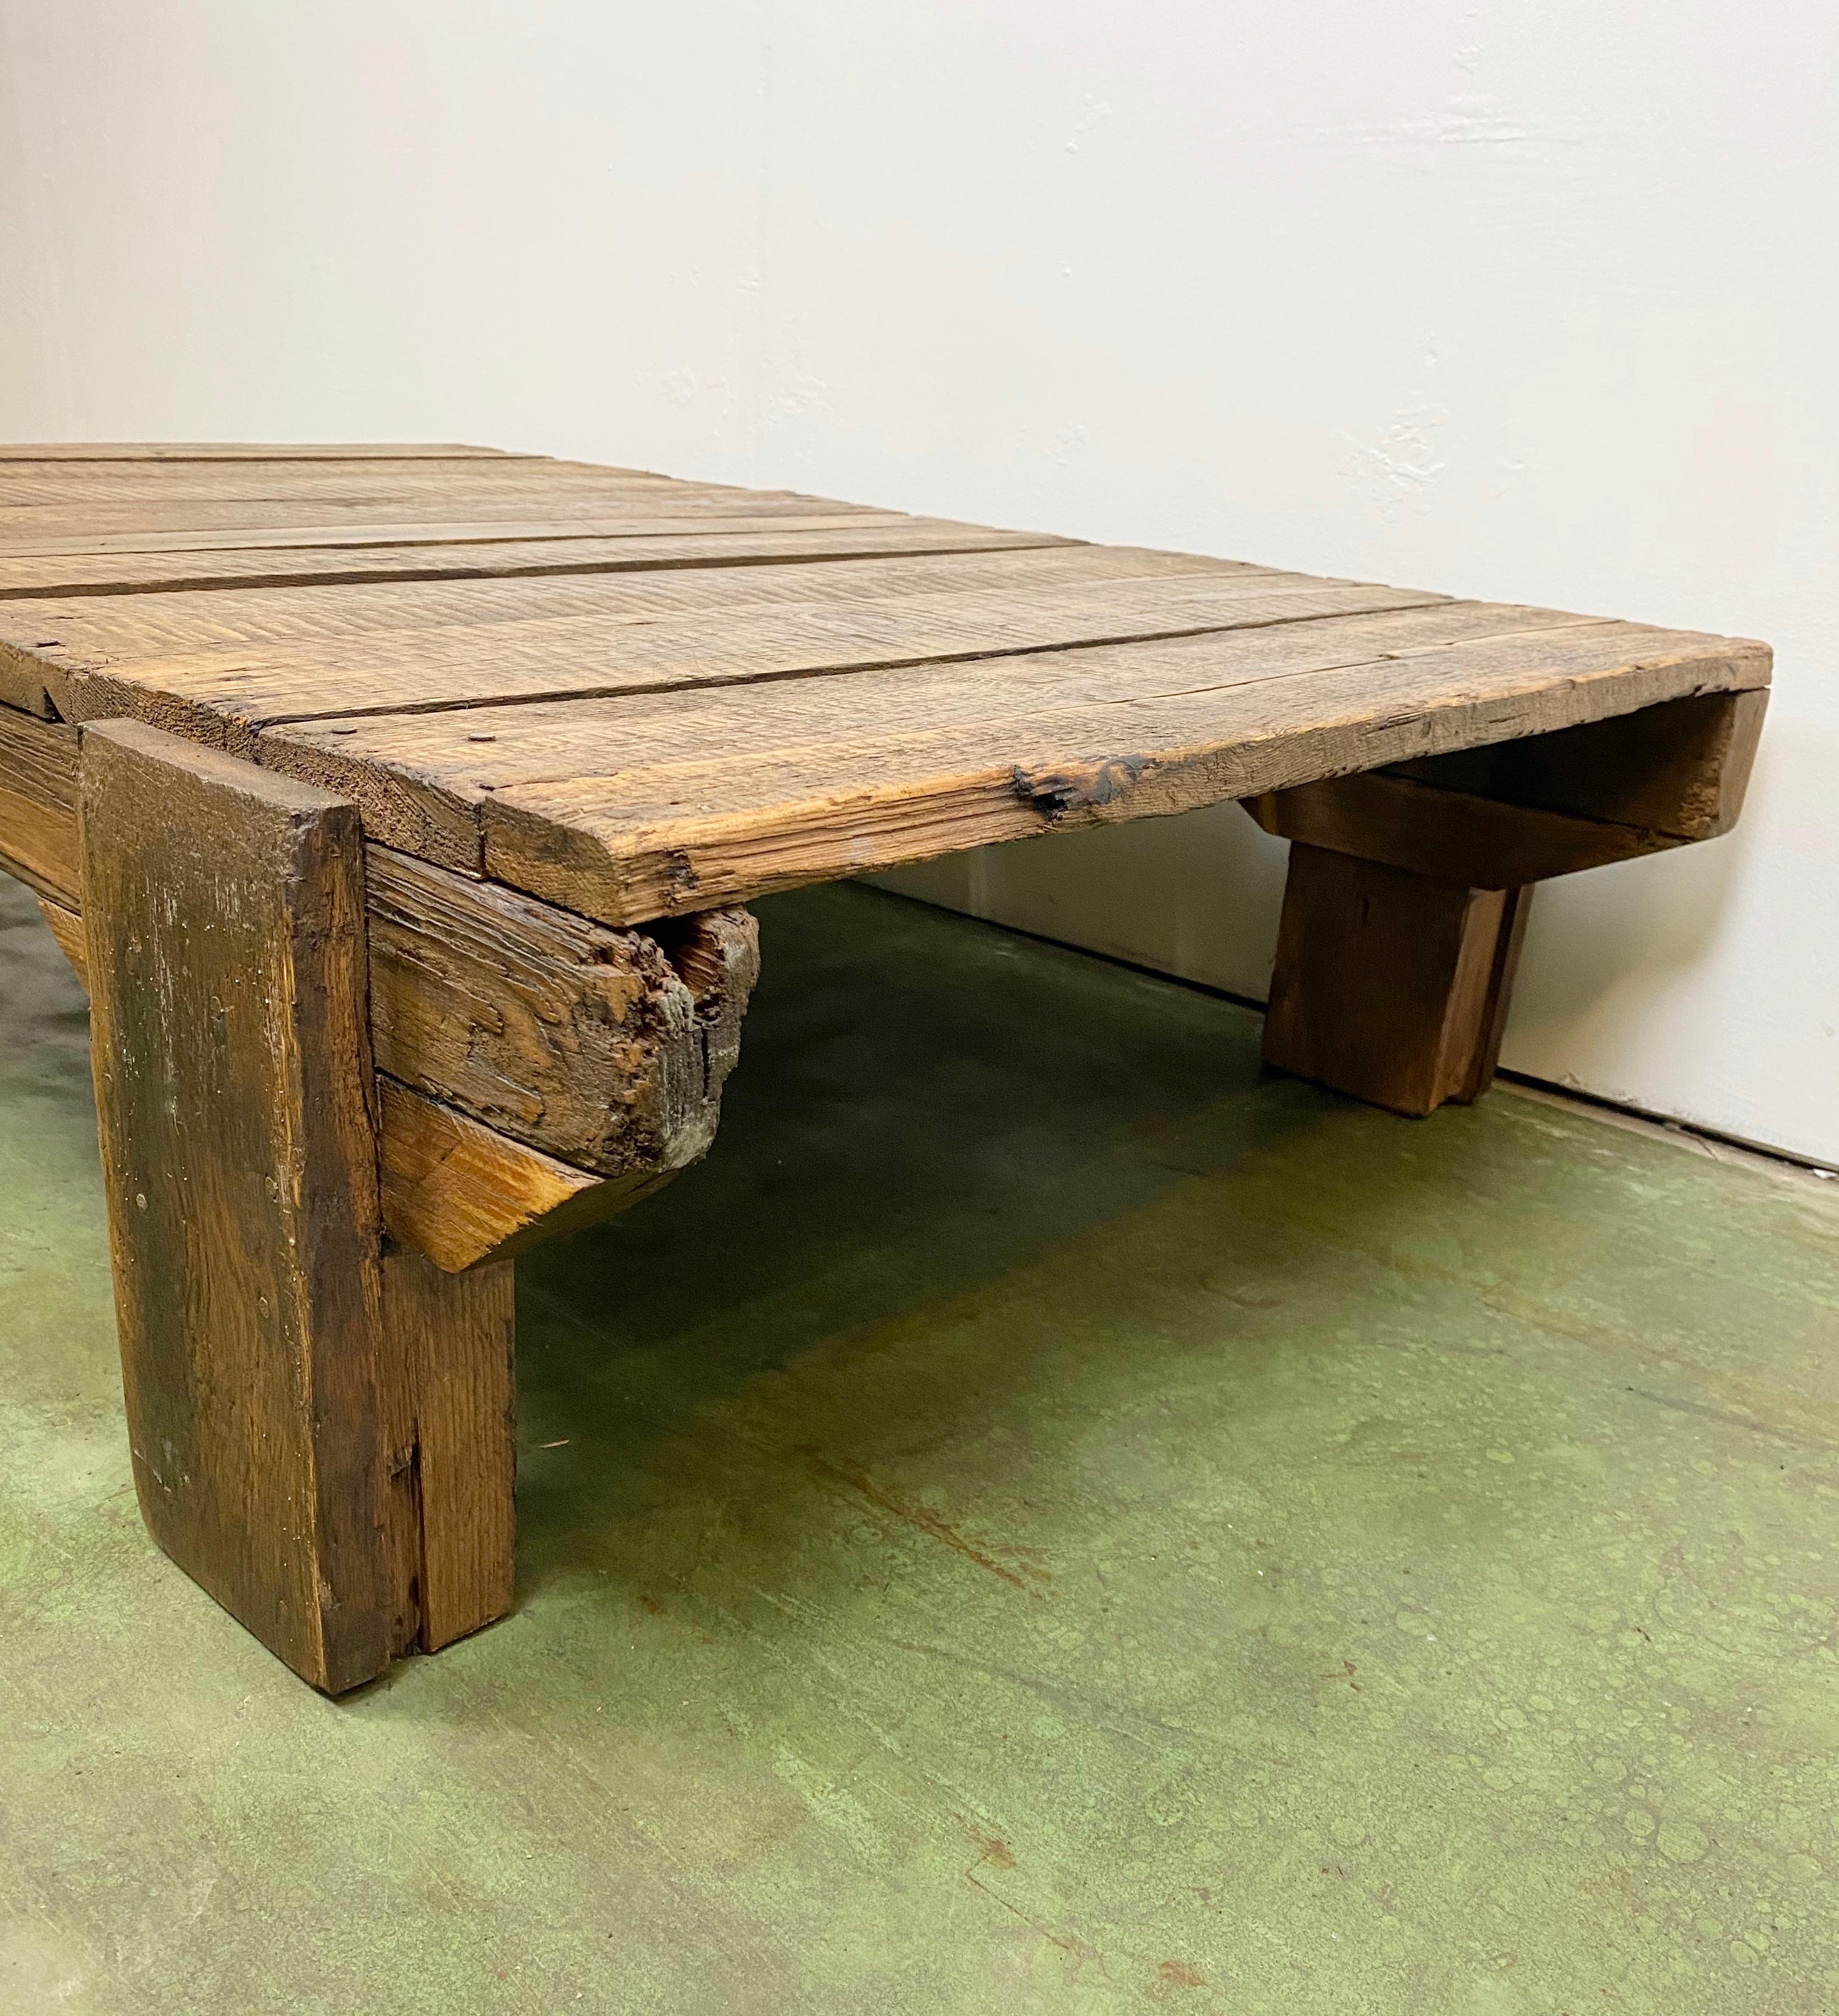 Czech Vintage Industrial Wooden Coffee Table, 1950s